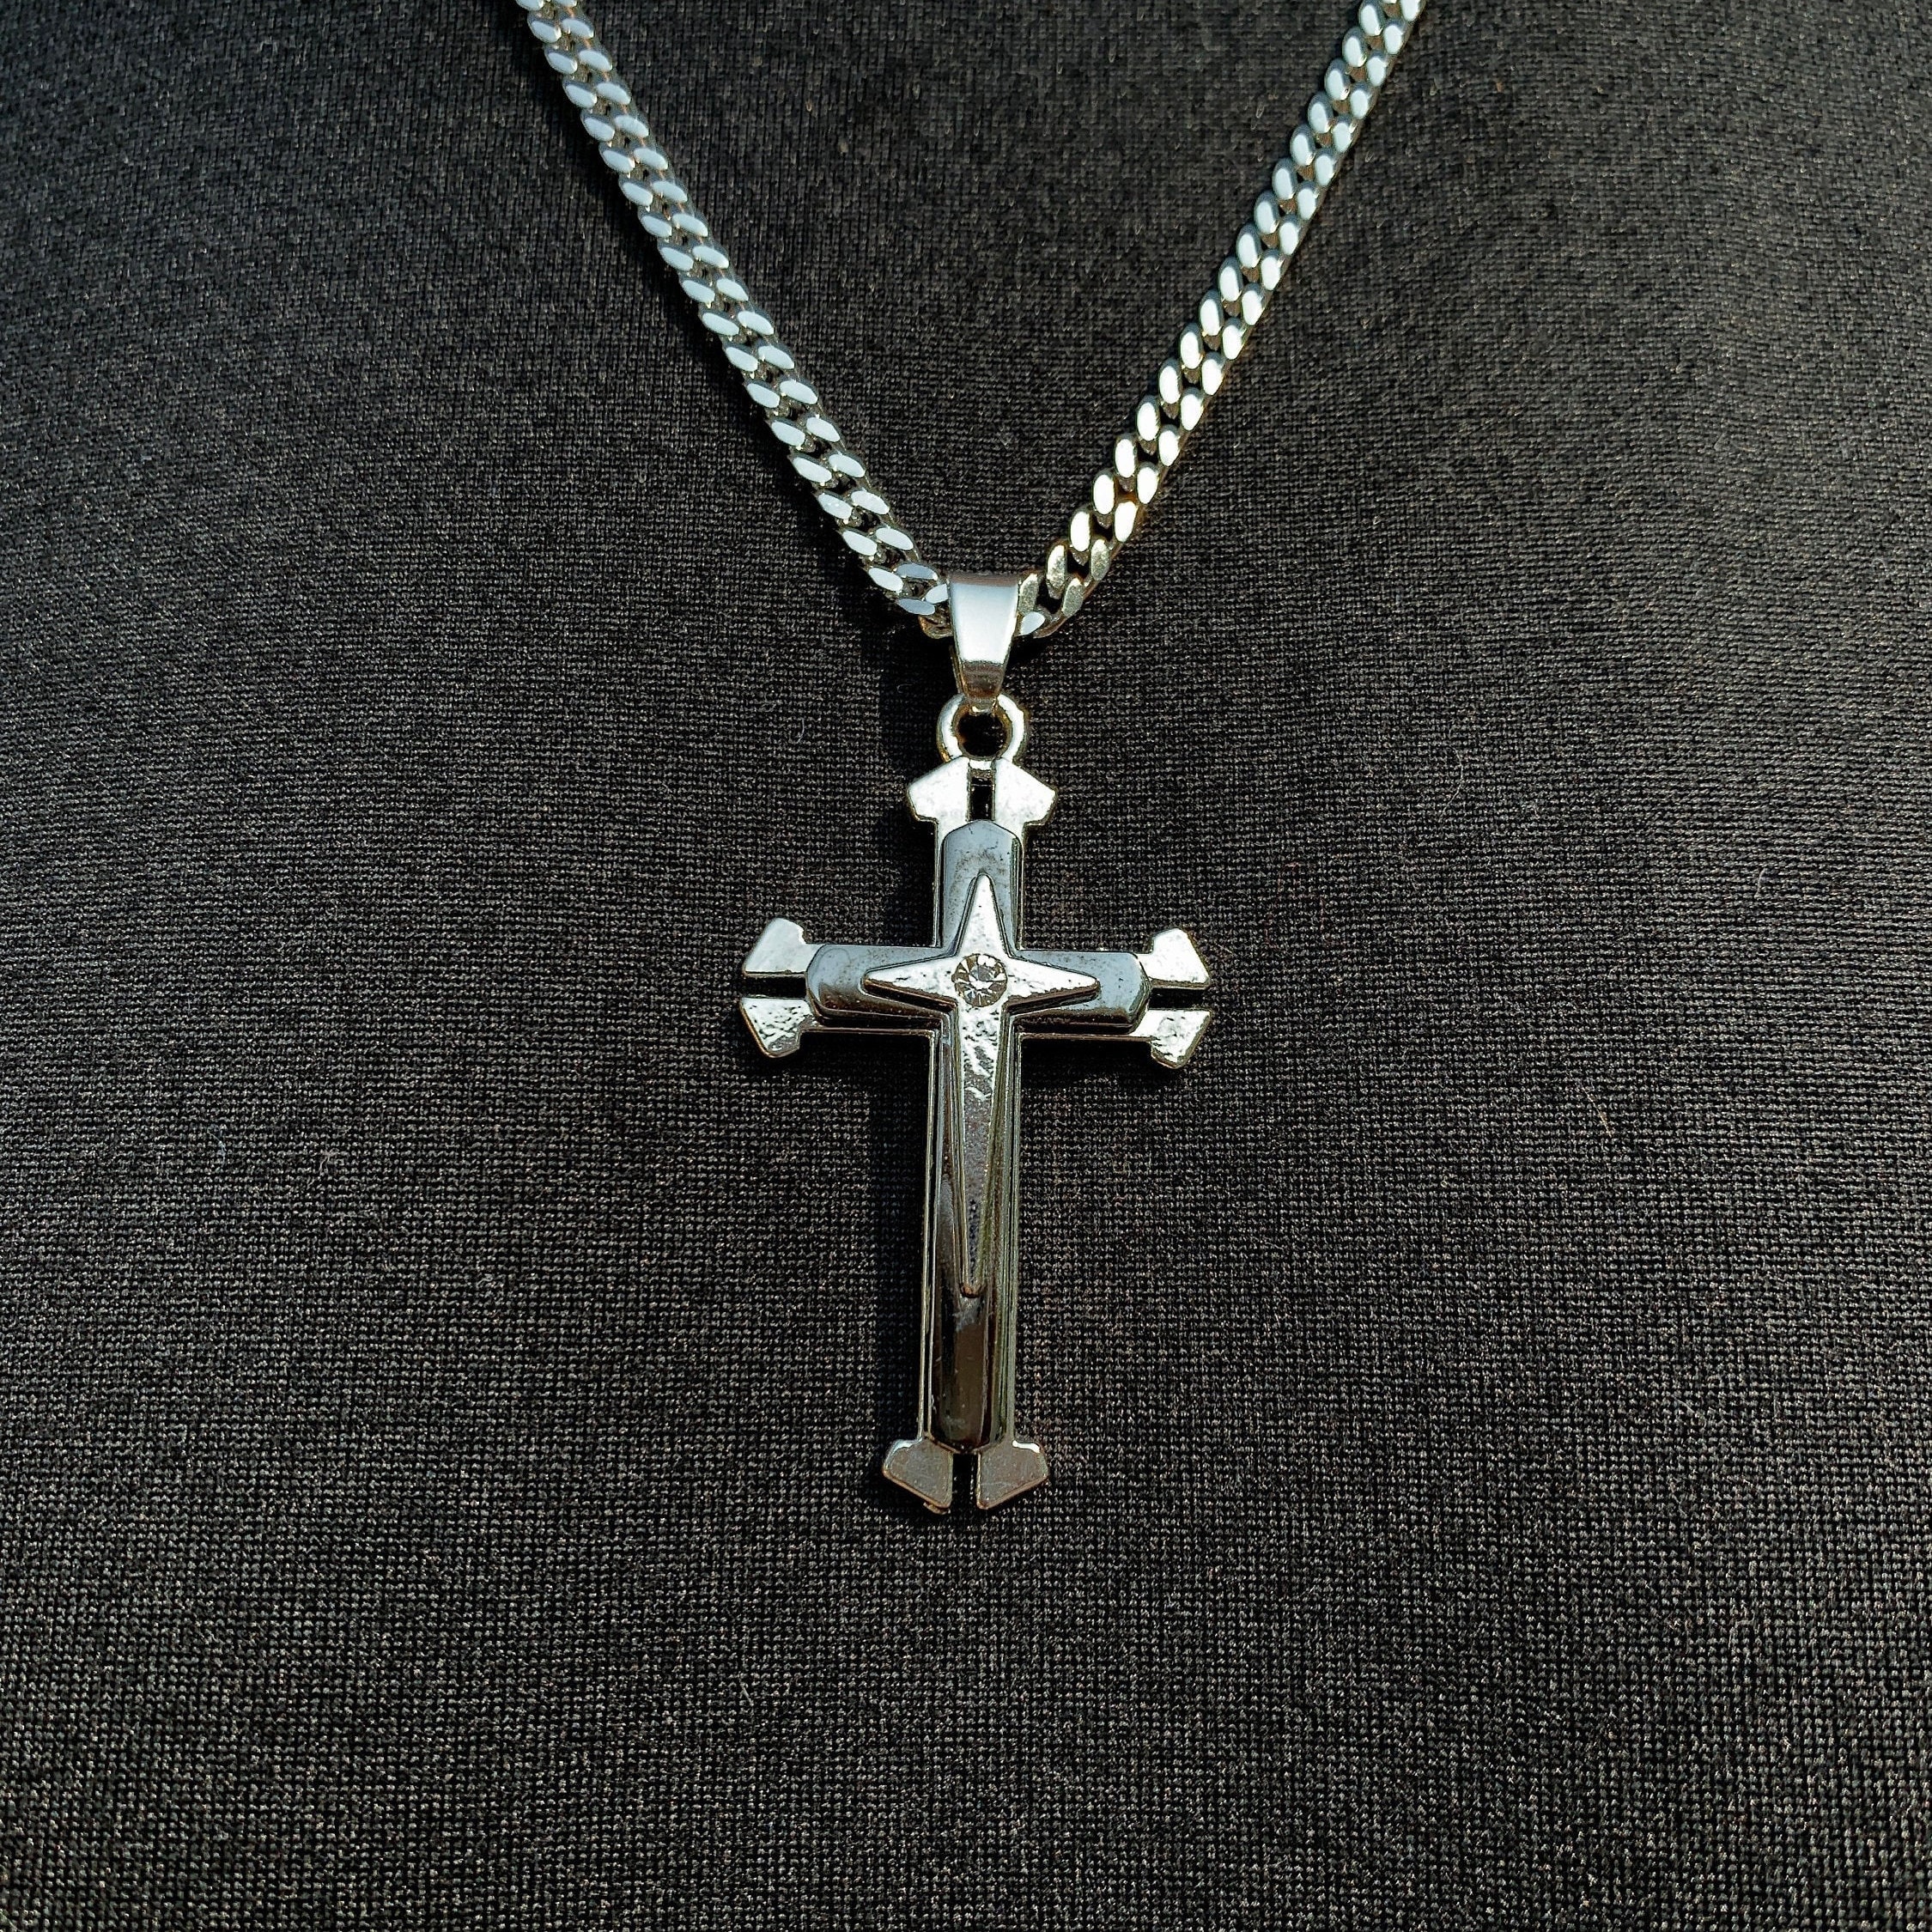 Stainless steel cross necklace for men, silver and stone grey cross ...